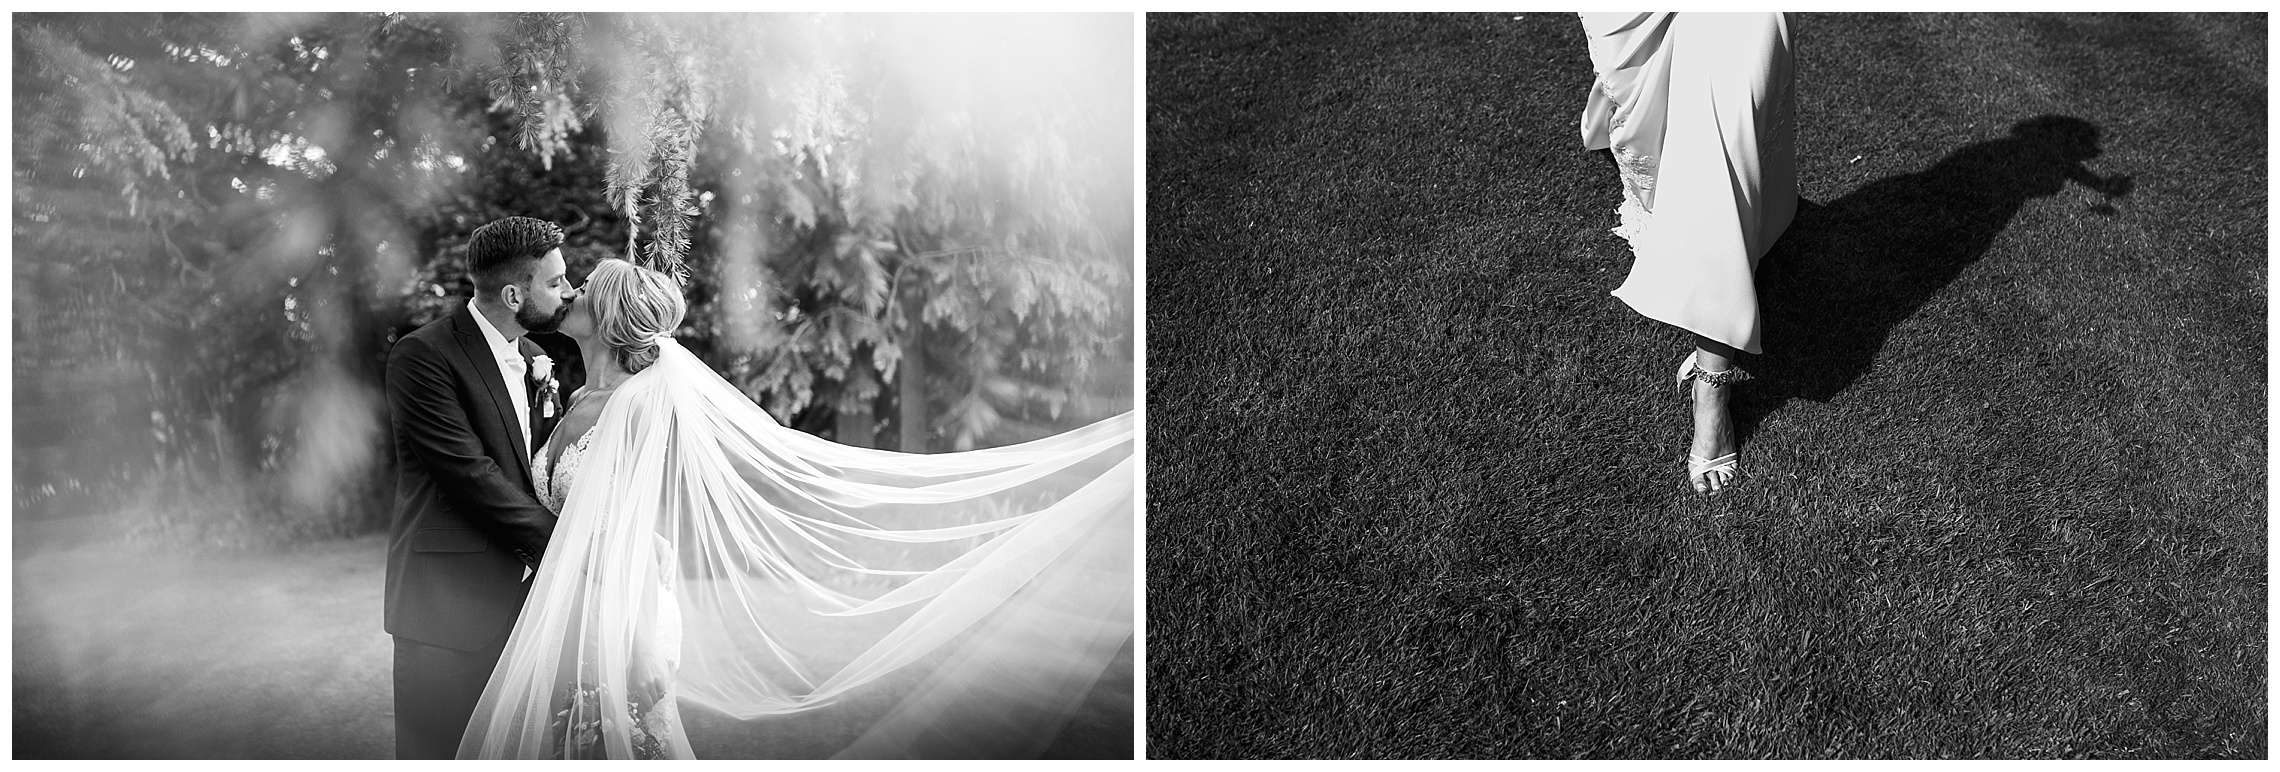 veil blowing in wind and wedding shoes